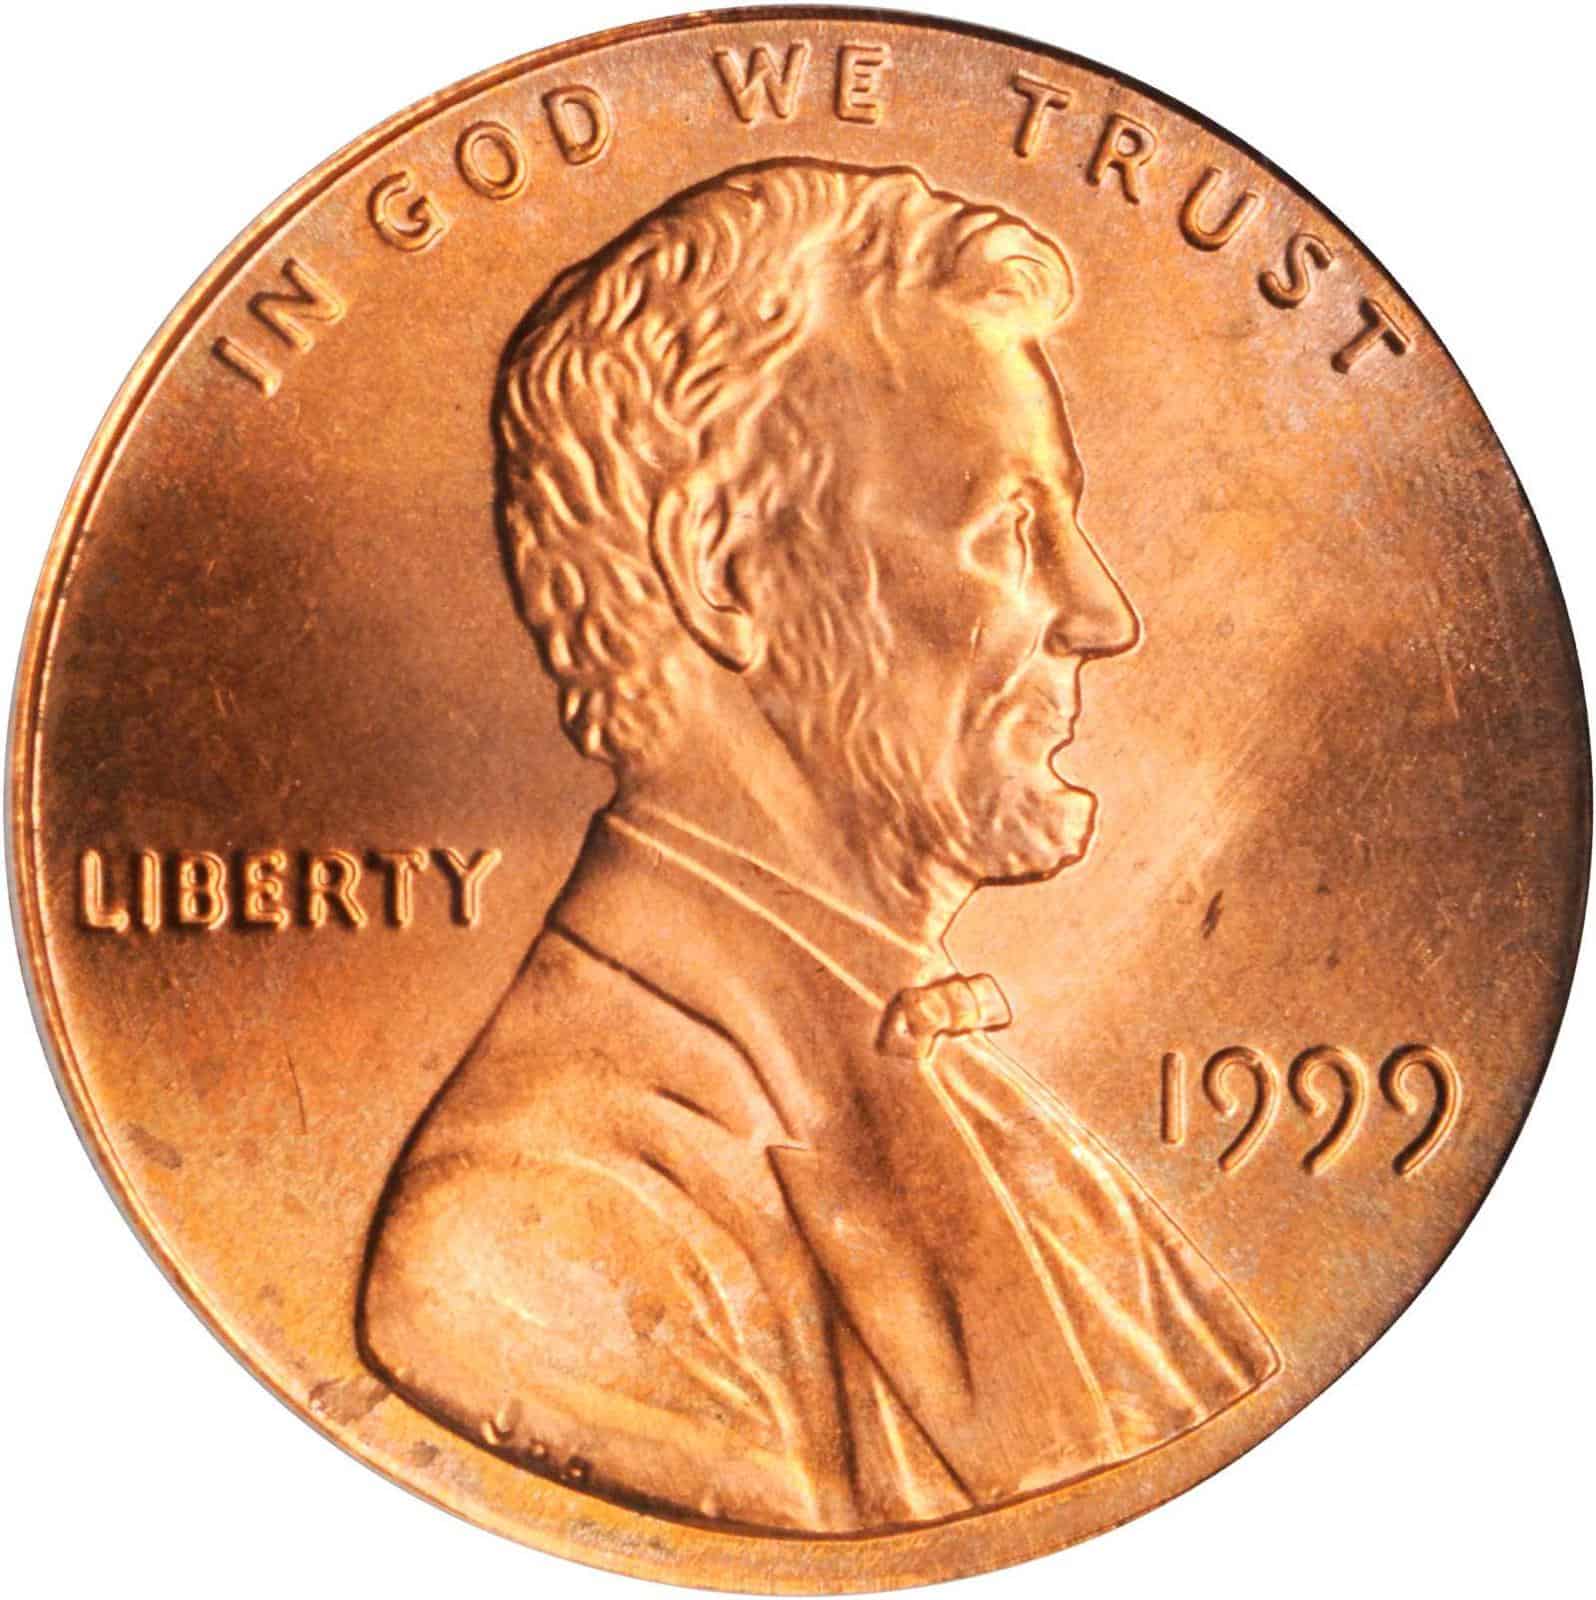 The obverse of the 1999 Lincoln Memorial penny